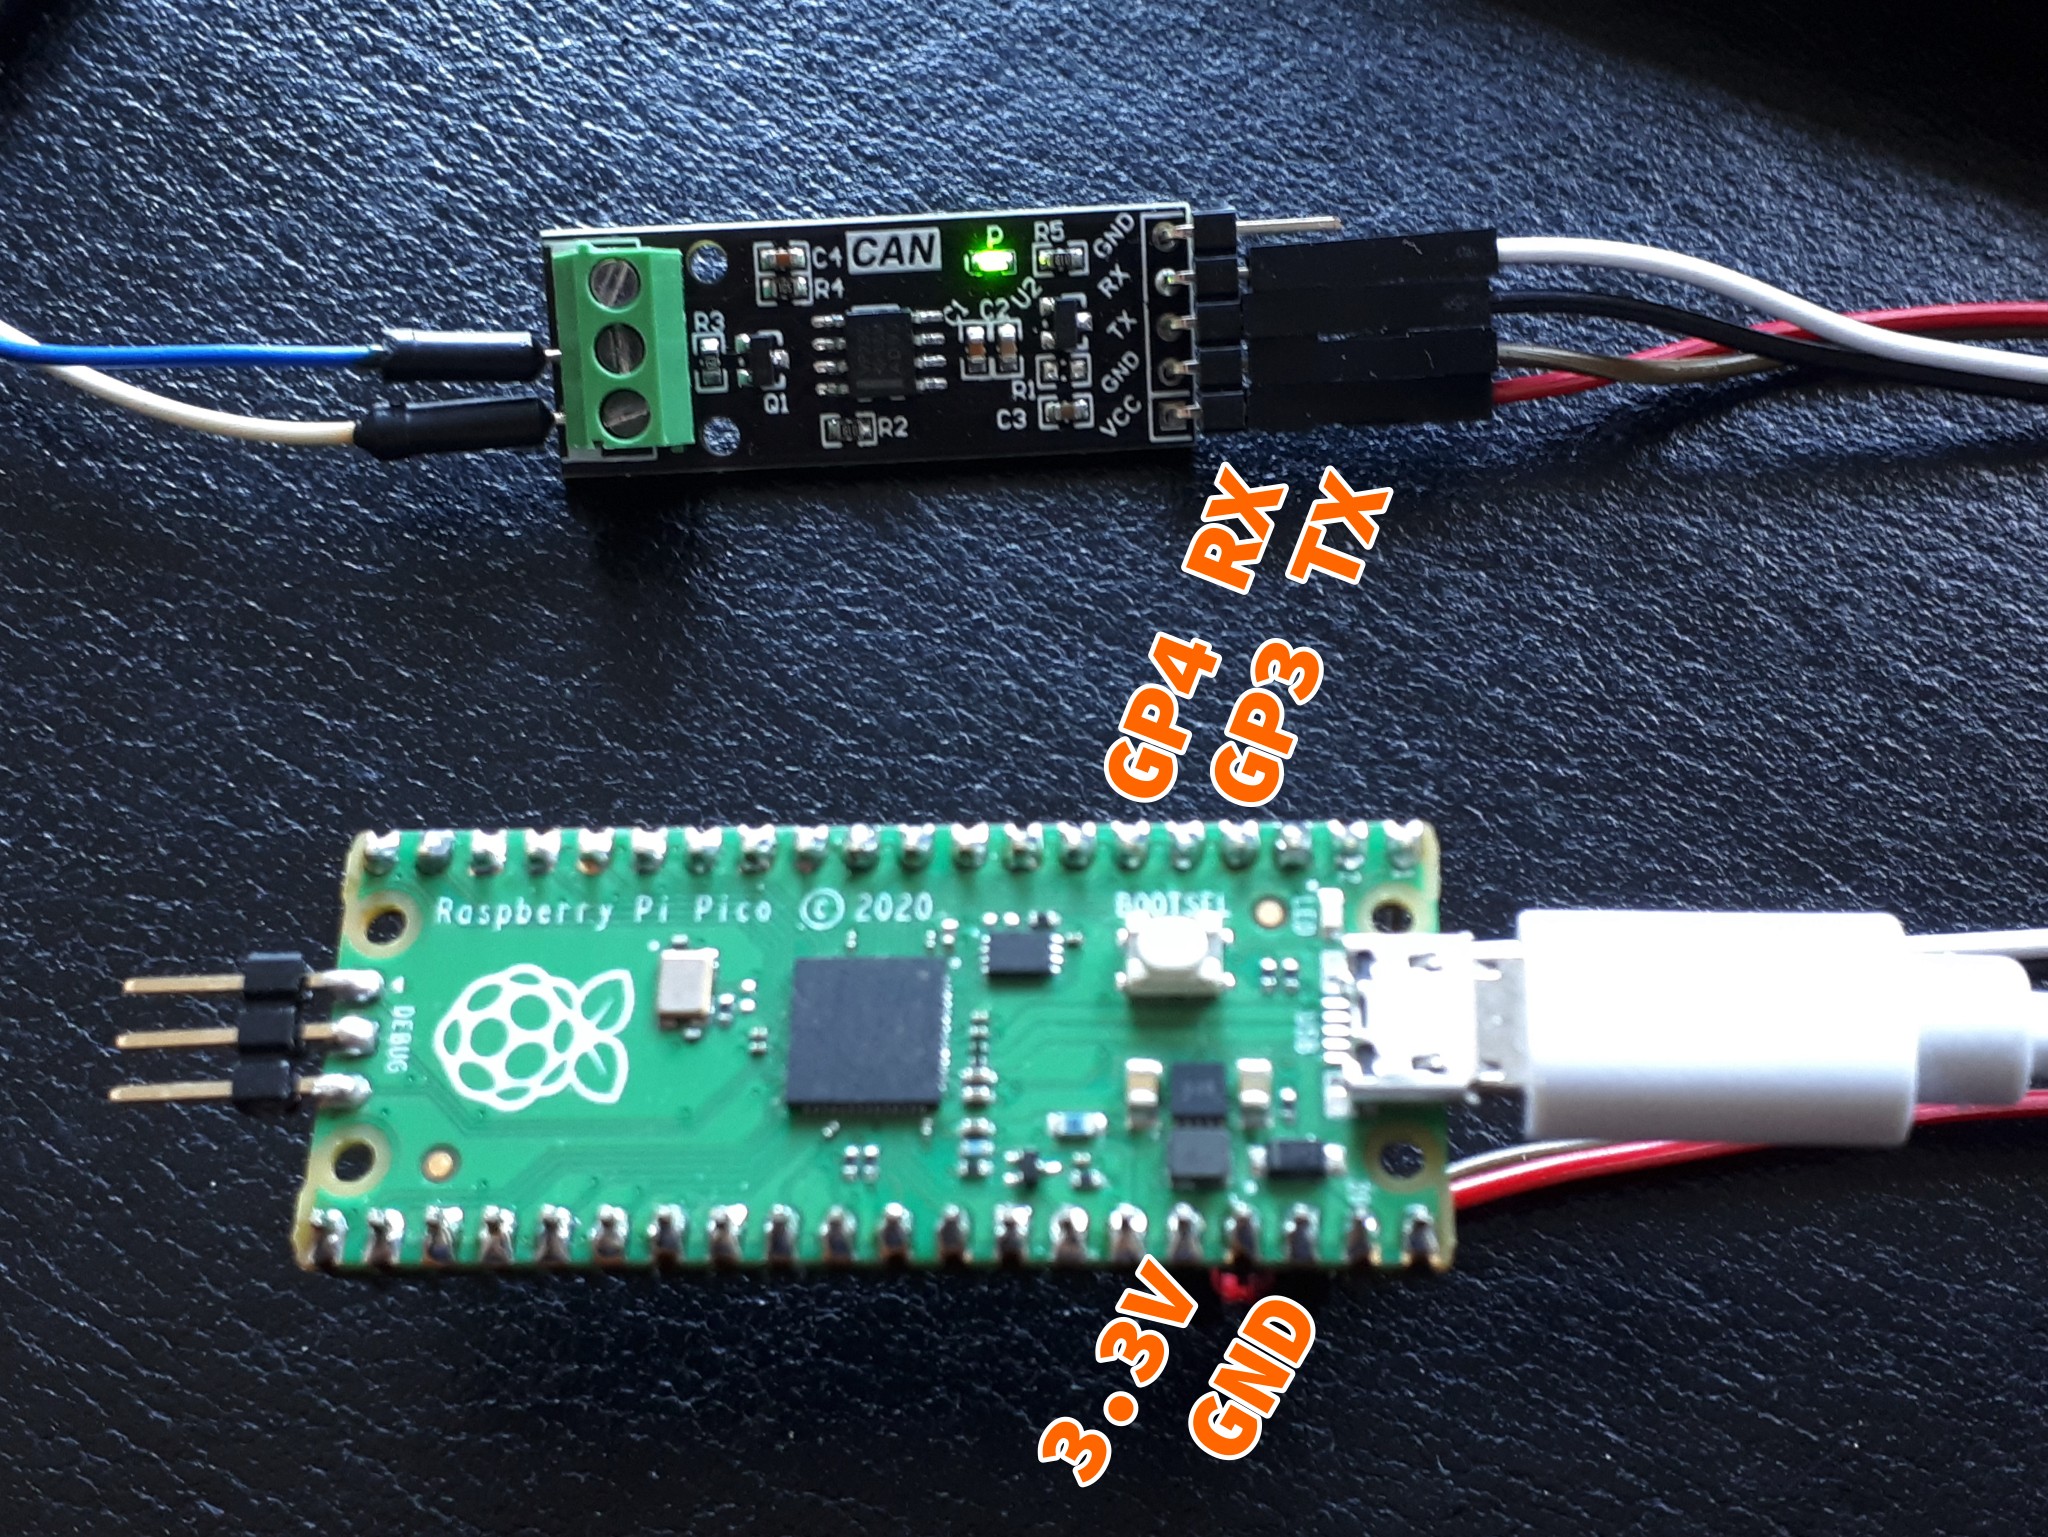 CAN transceiver connection to Raspberry Pi Pico